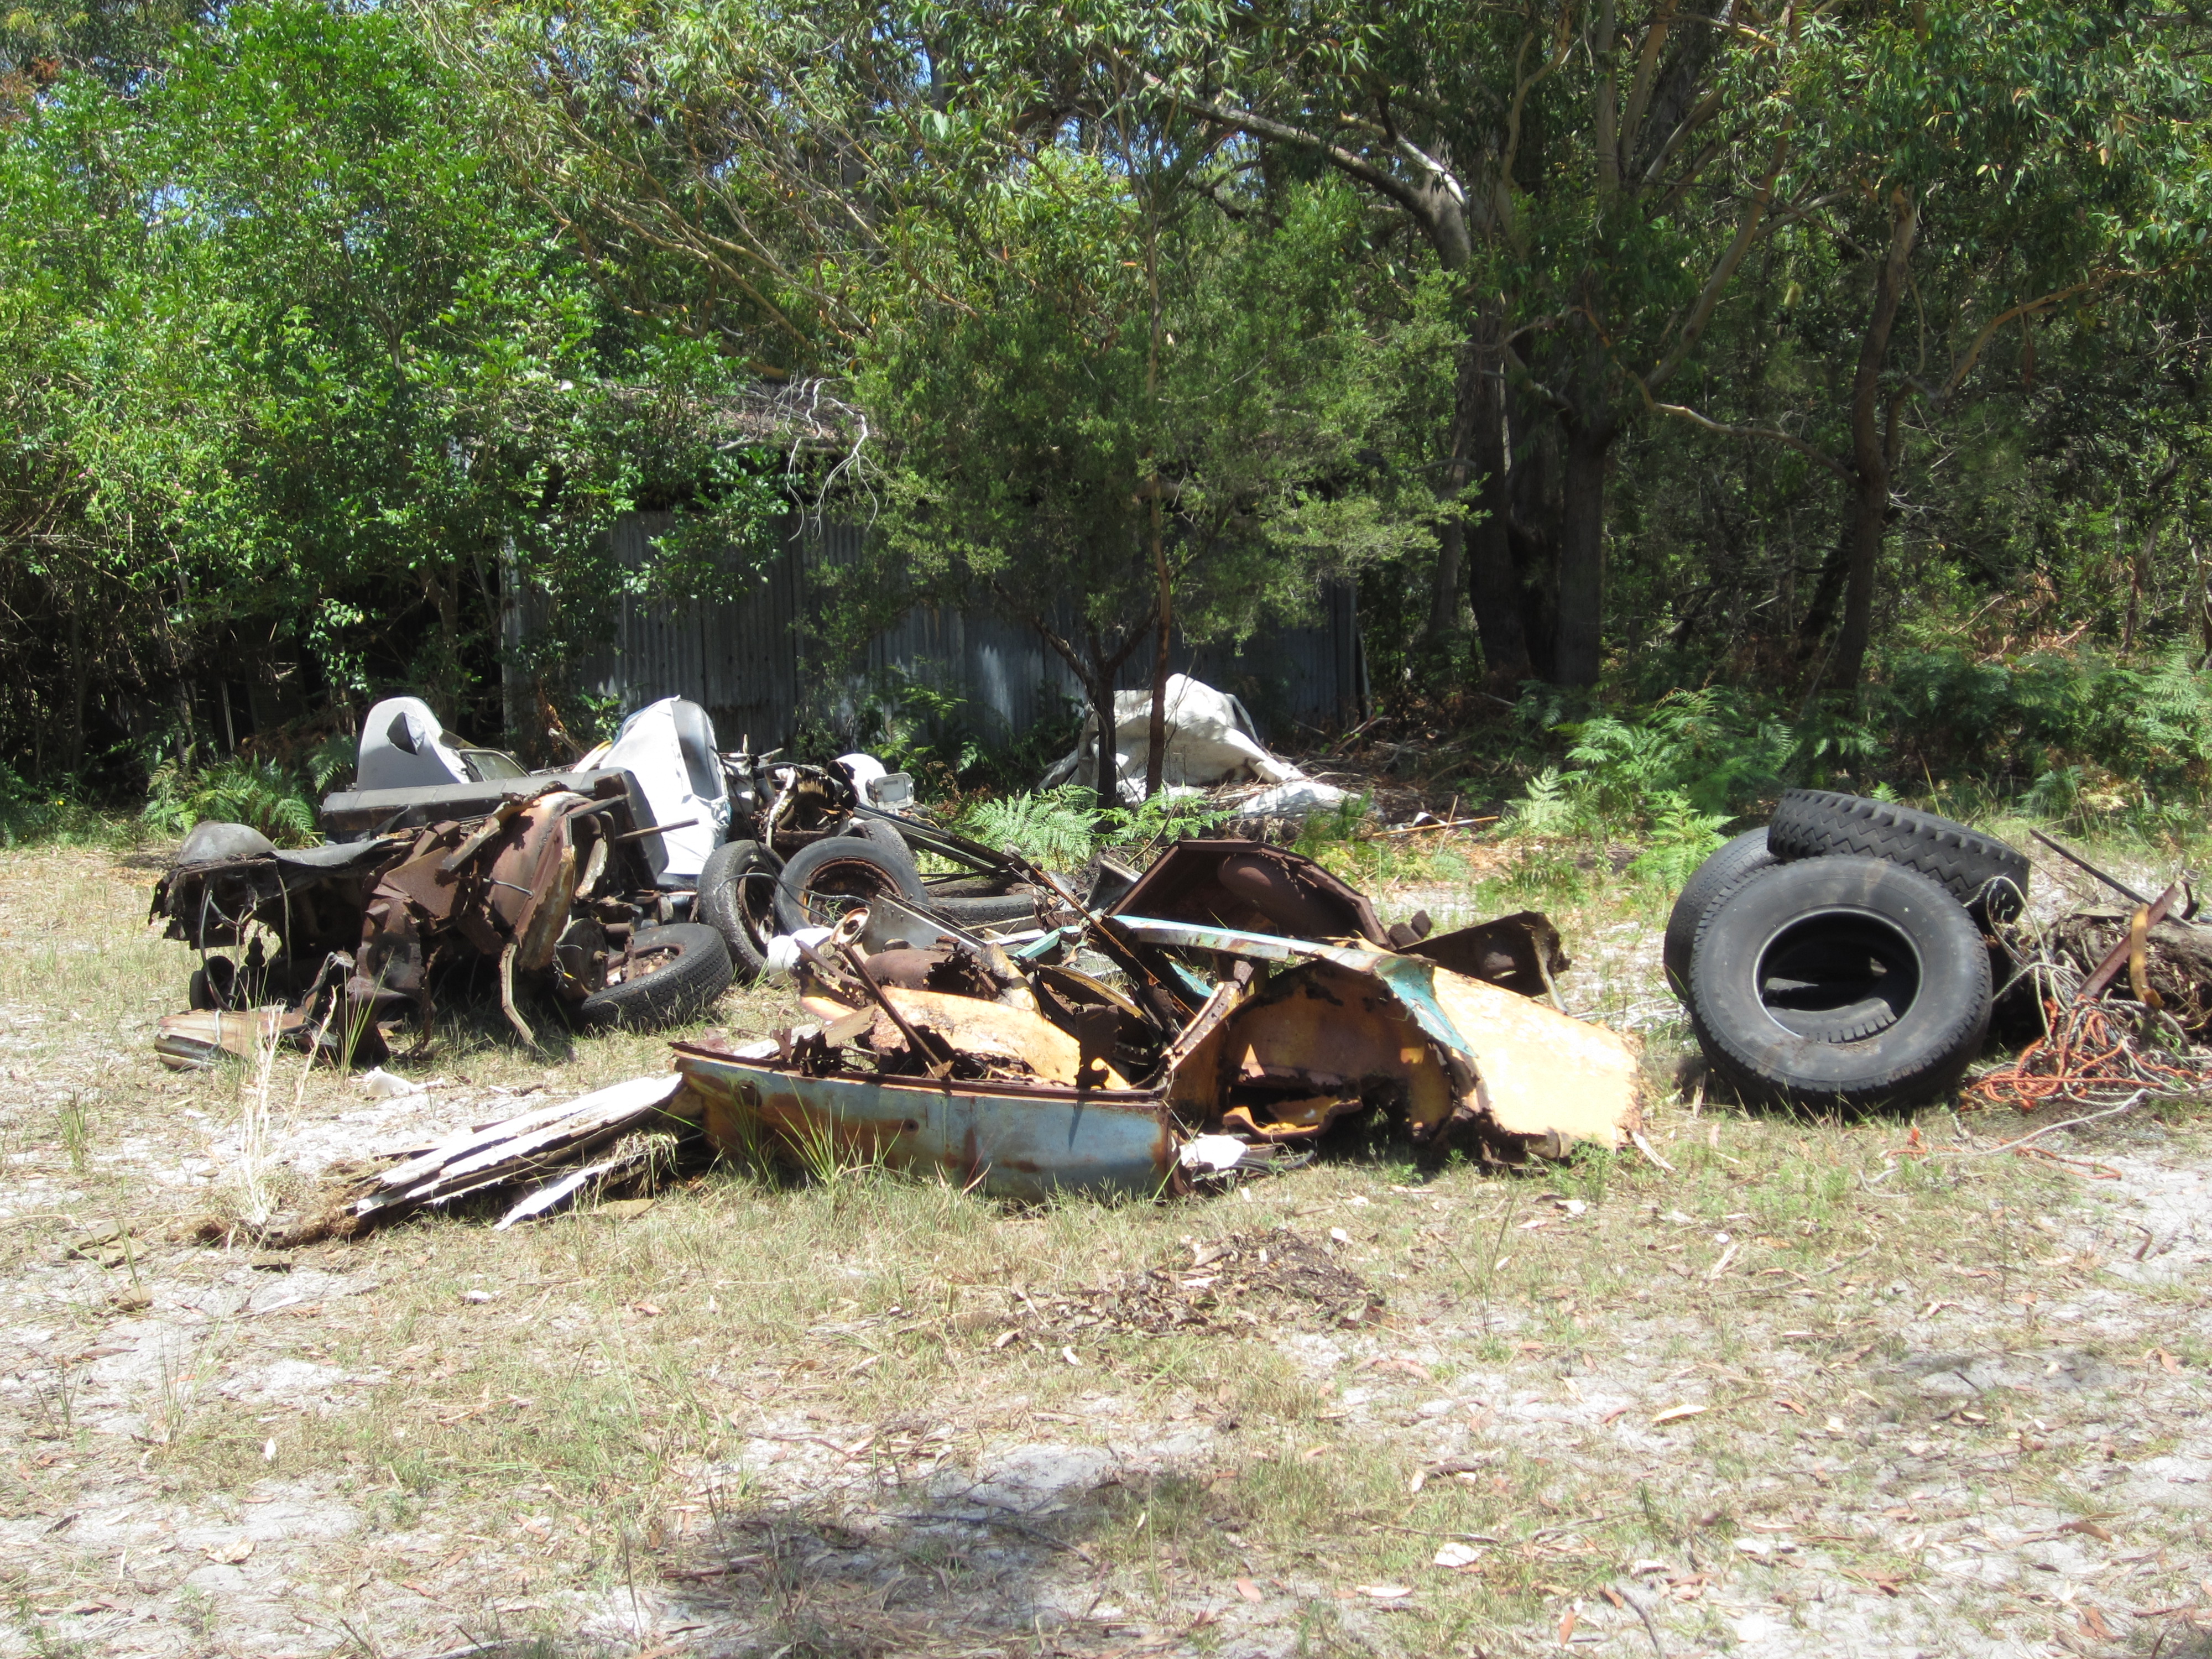 Illegal dumping costs $3M each year.